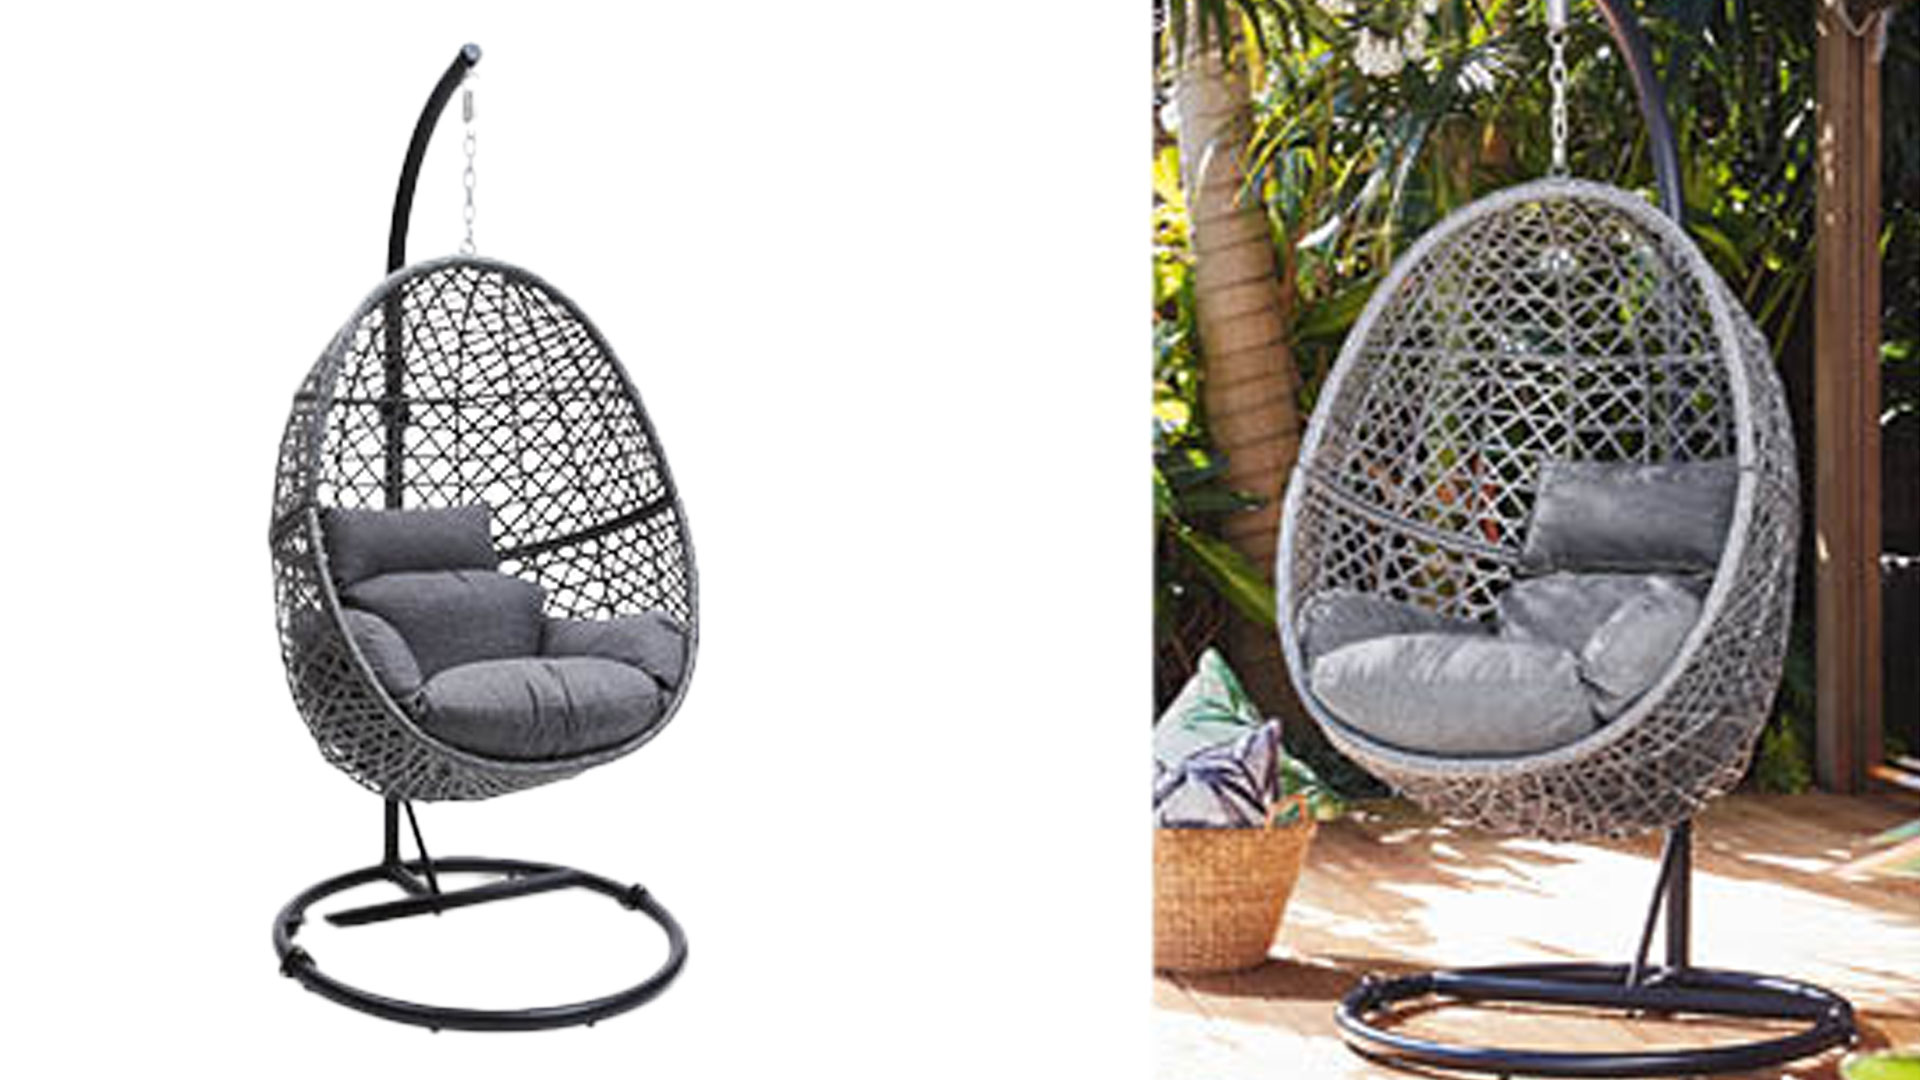 Aldi's Hanging Egg Chair Is Back On Sale Just In Time For